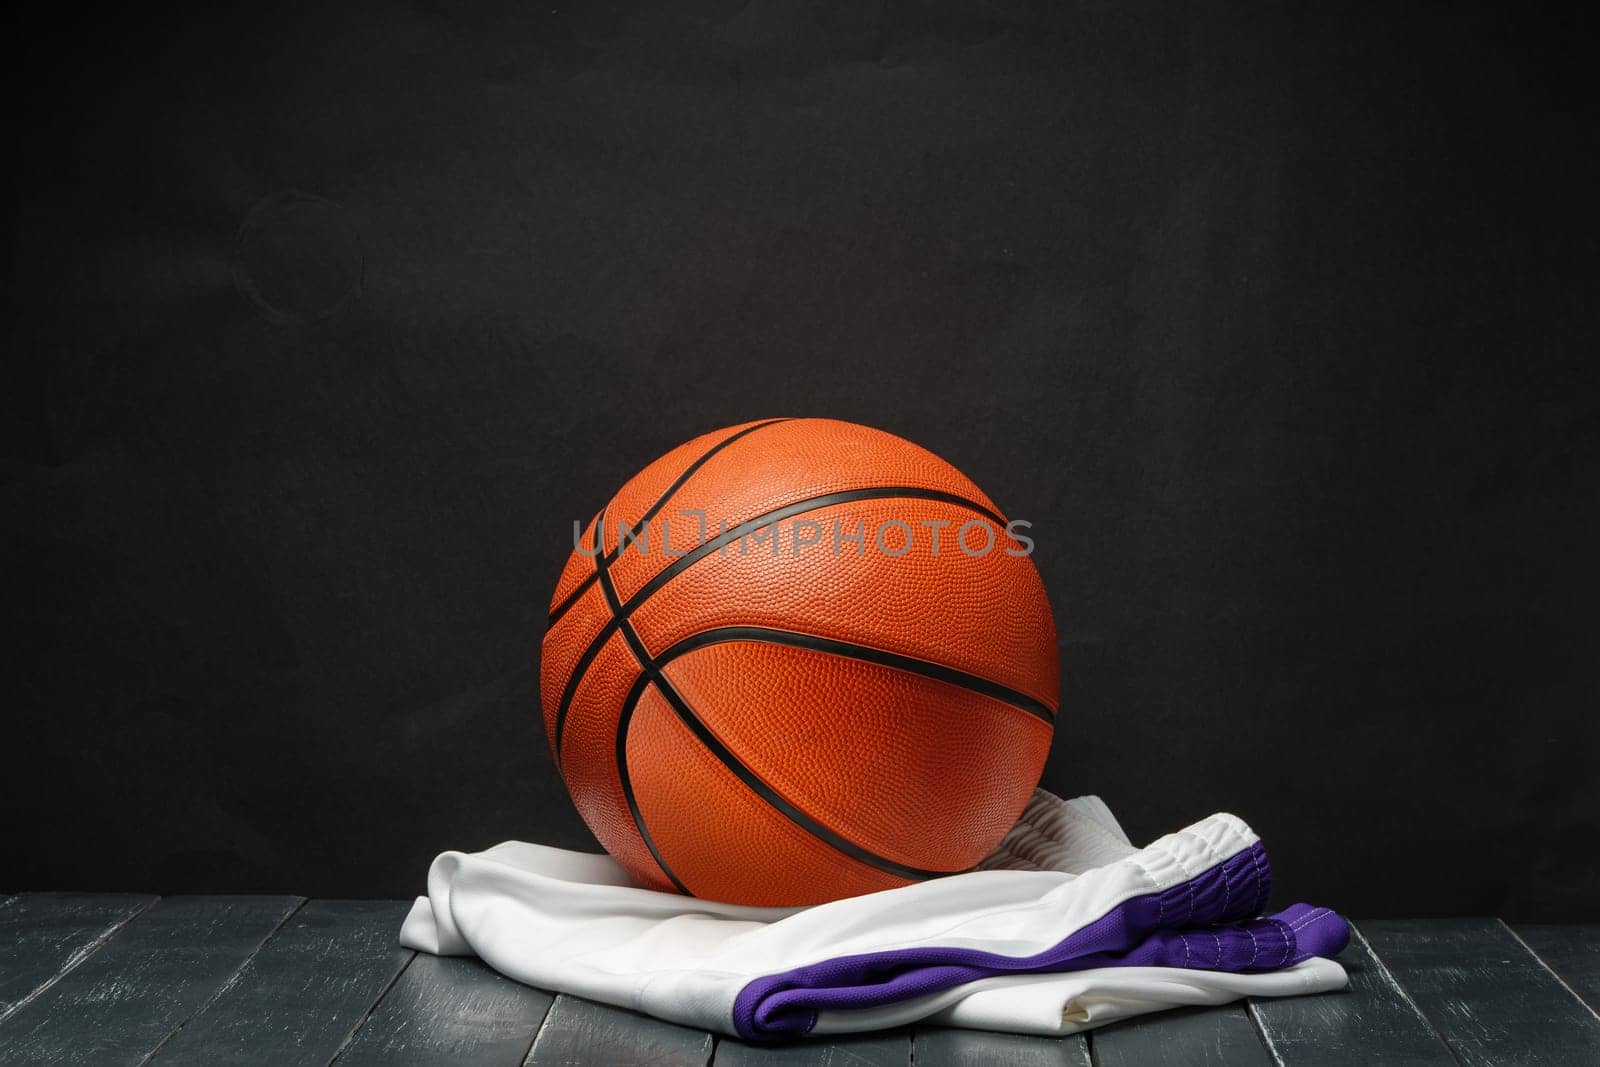 Vibrant Orange Basketball Resting on a Dark Wooden Floor With White and Purple uniform by Fabrikasimf